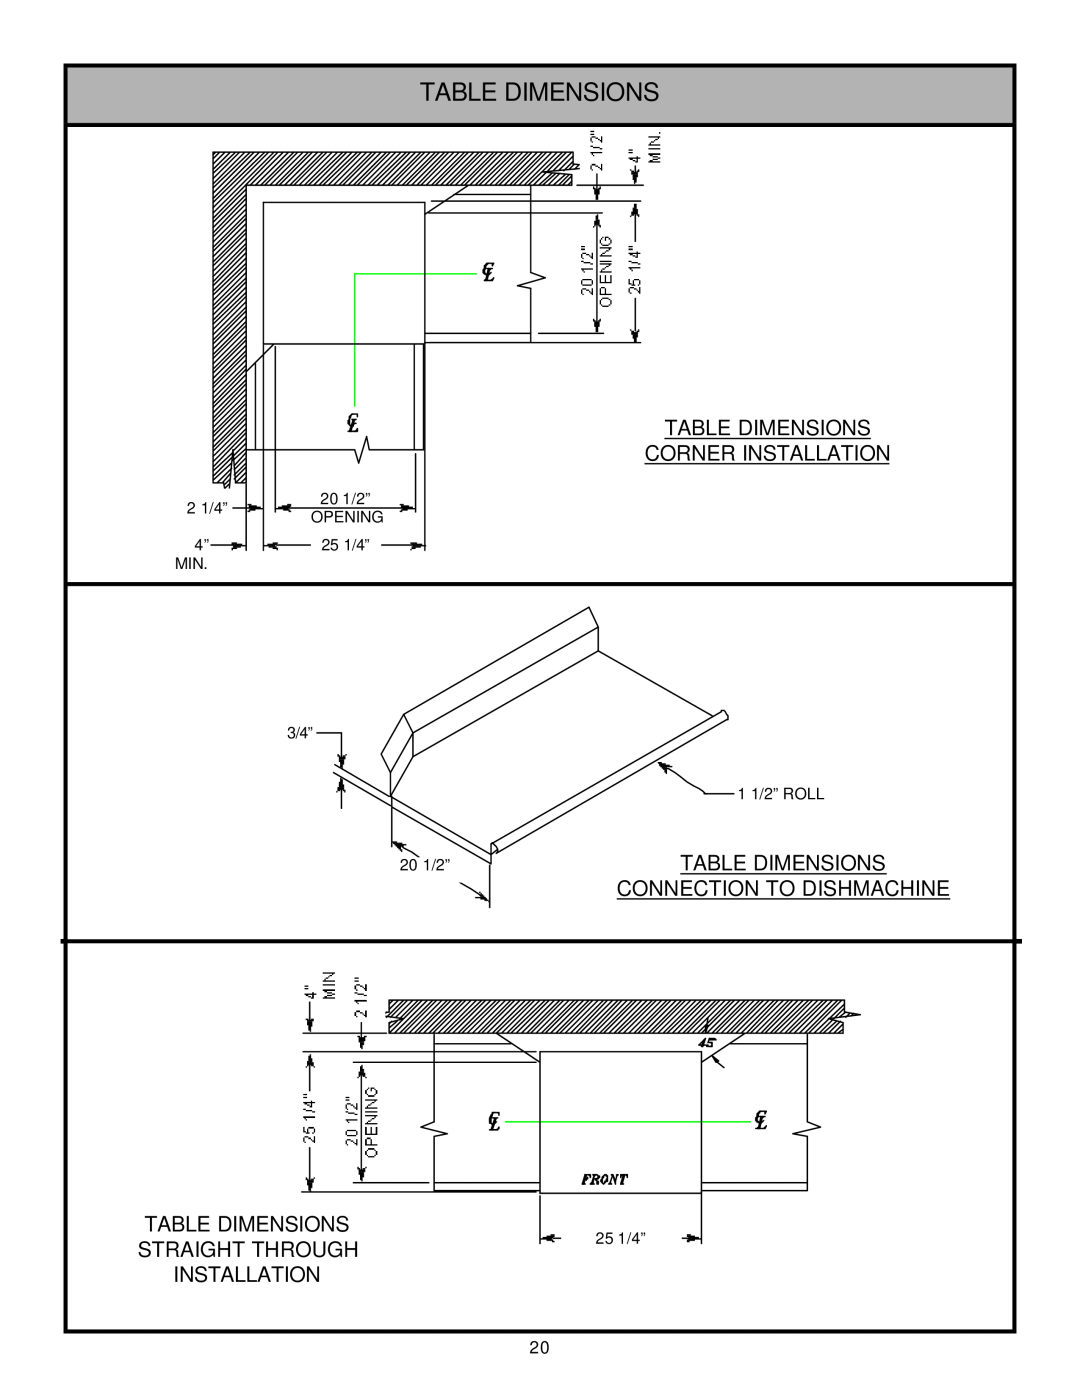 Jackson Tempstar GP technical manual Corner Installation, Table Dimensions Connection To Dishmachine 